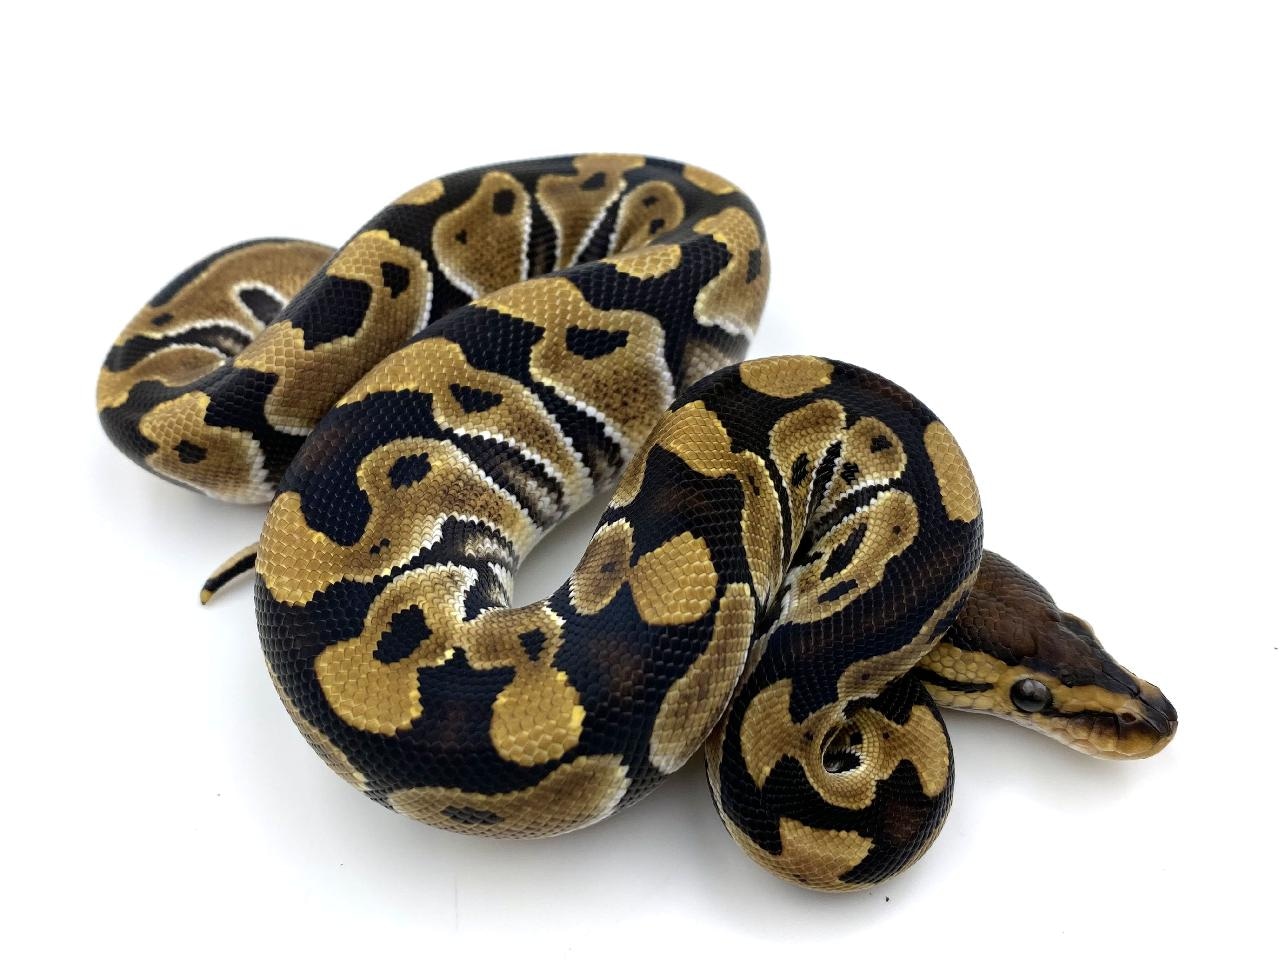 Cryptic Ball Python by Royal Constrictor Designs